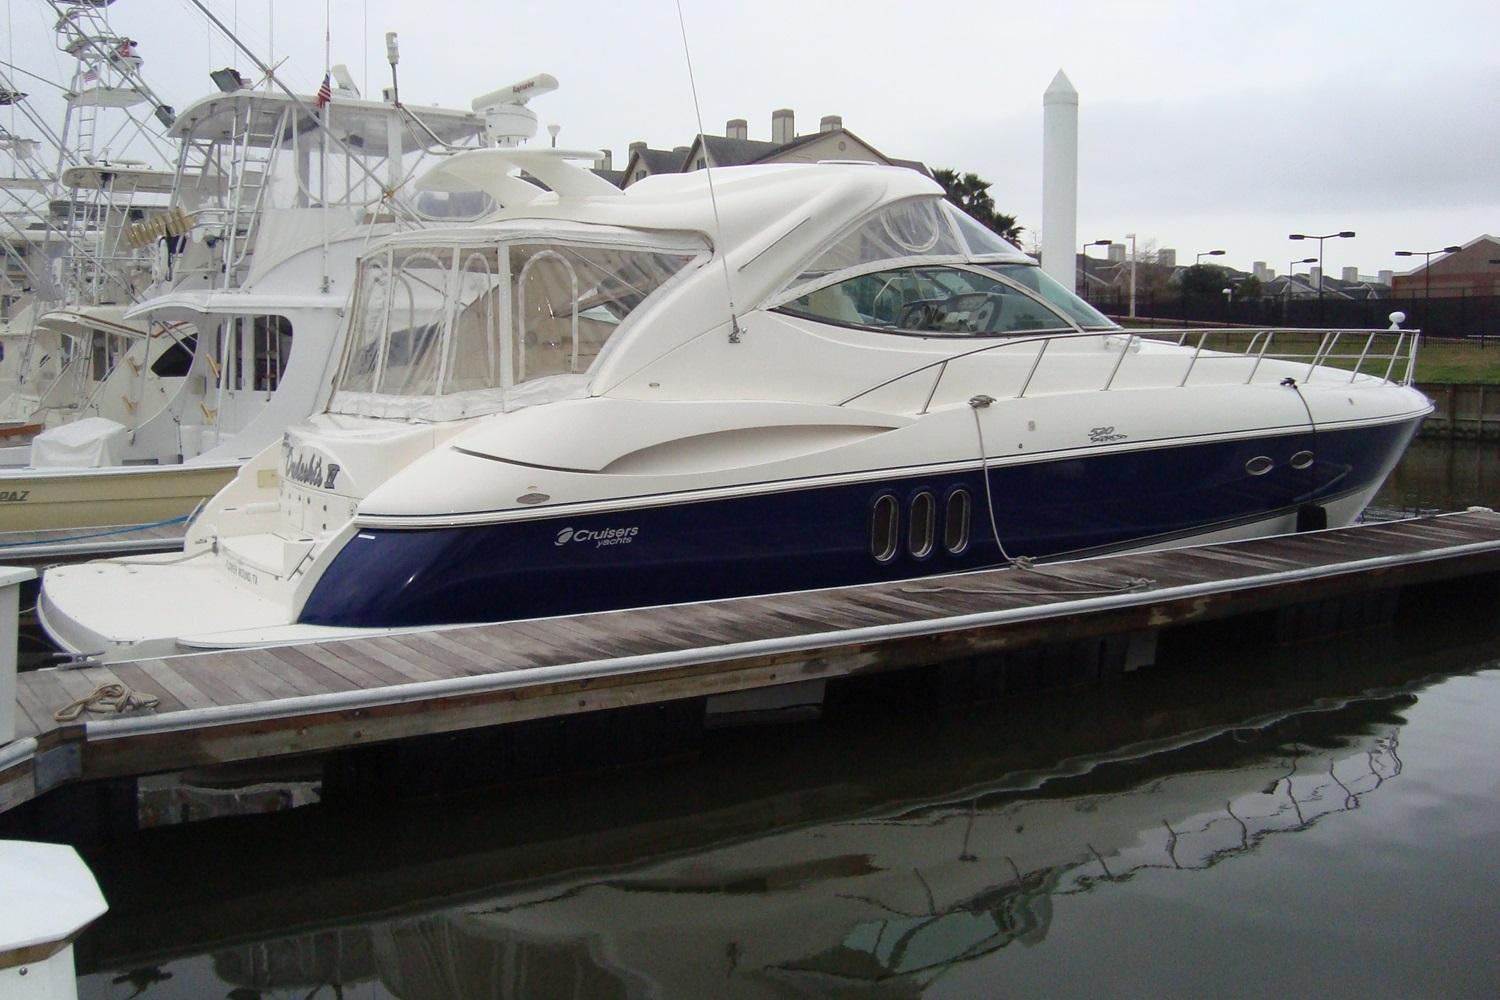 Cruisers Yachts 520 Express, League City